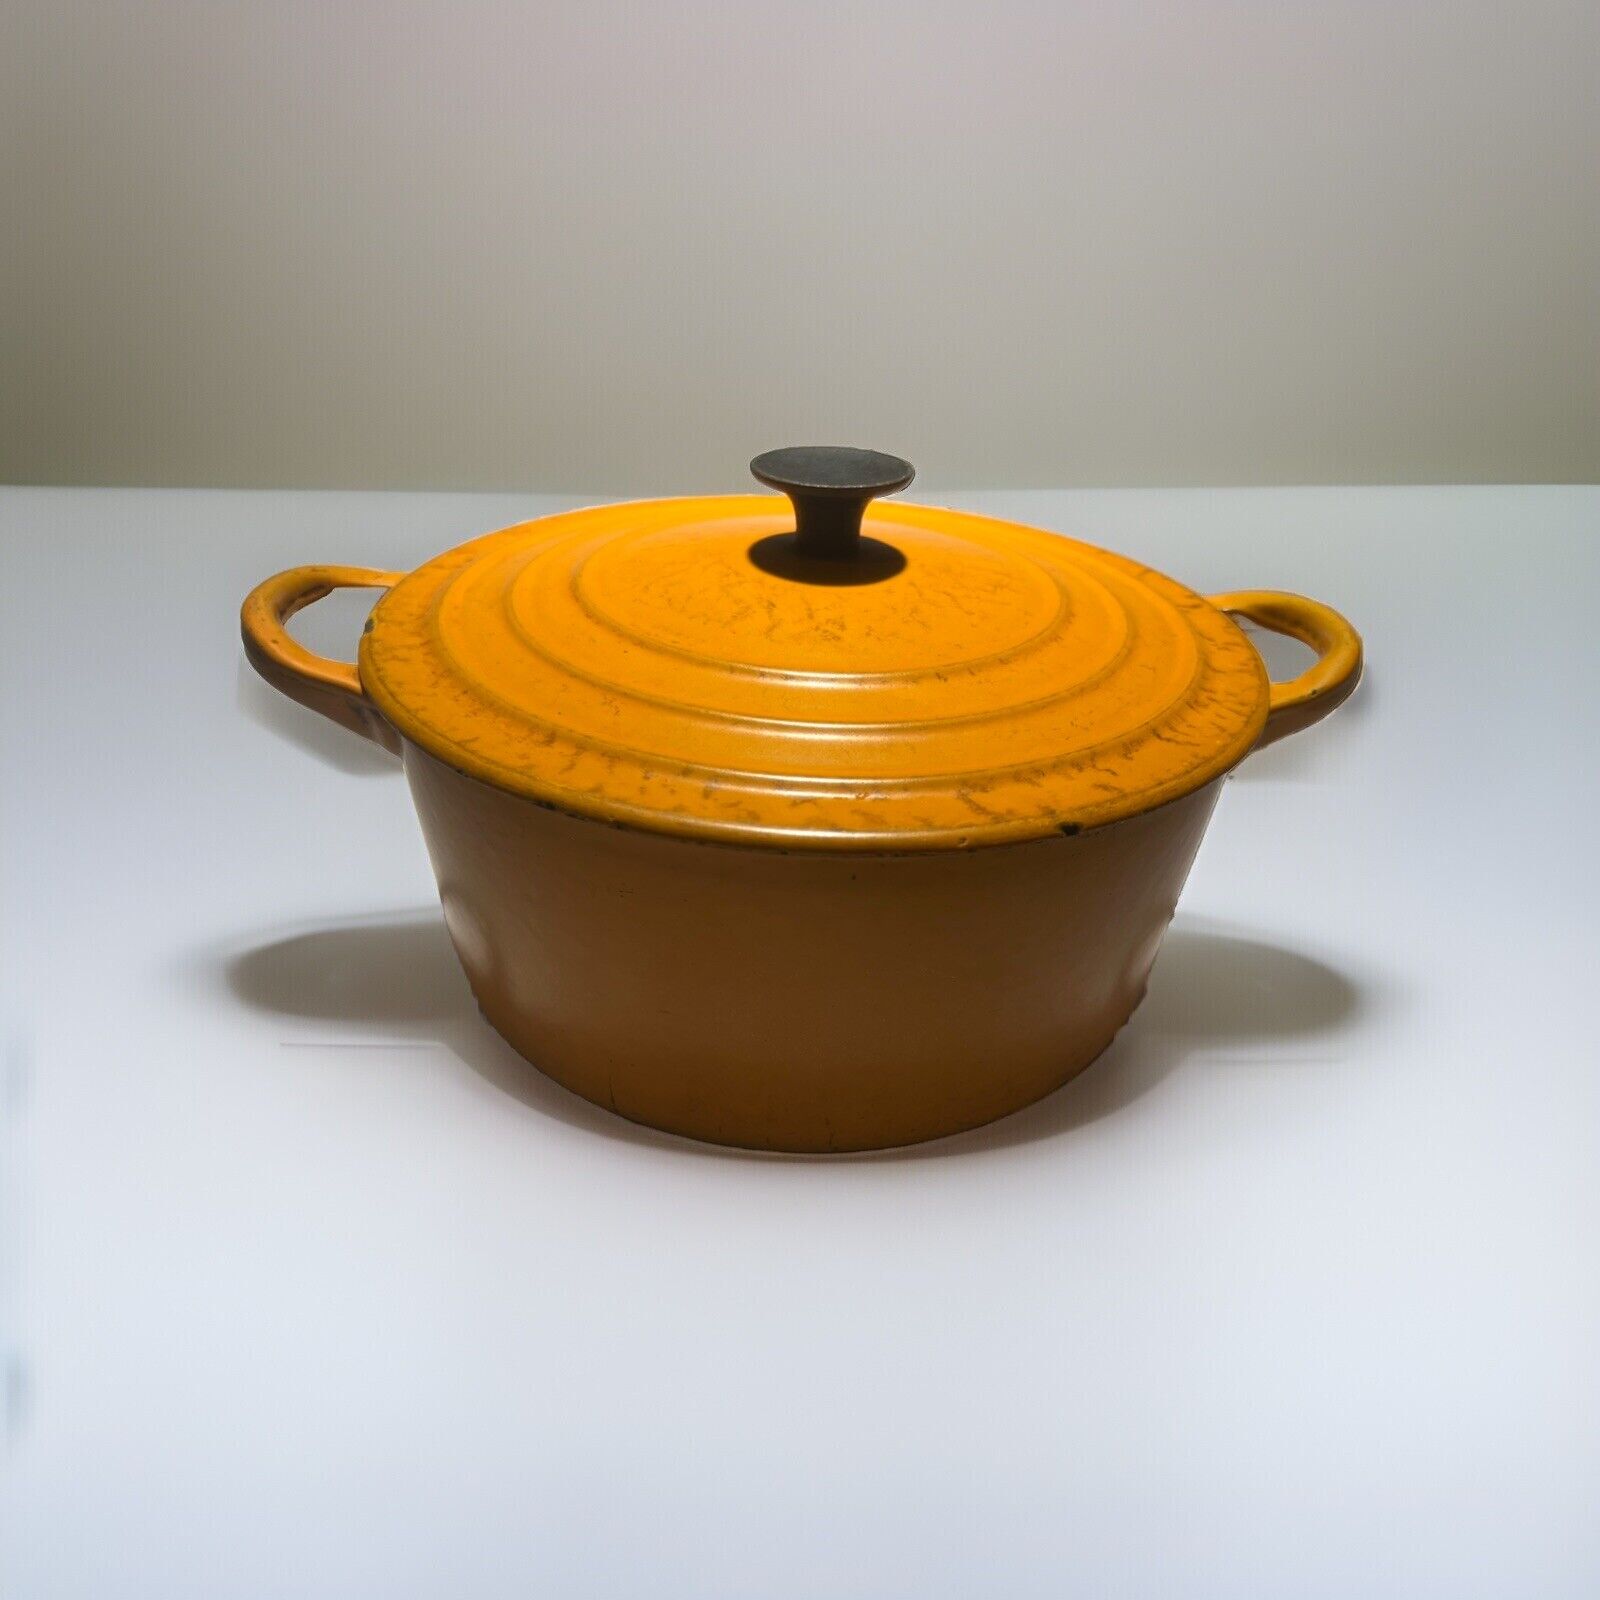 Vintage Le Creuset Dutch Oven Made In France B  2 qt. Yellow Enameled Cast Iron